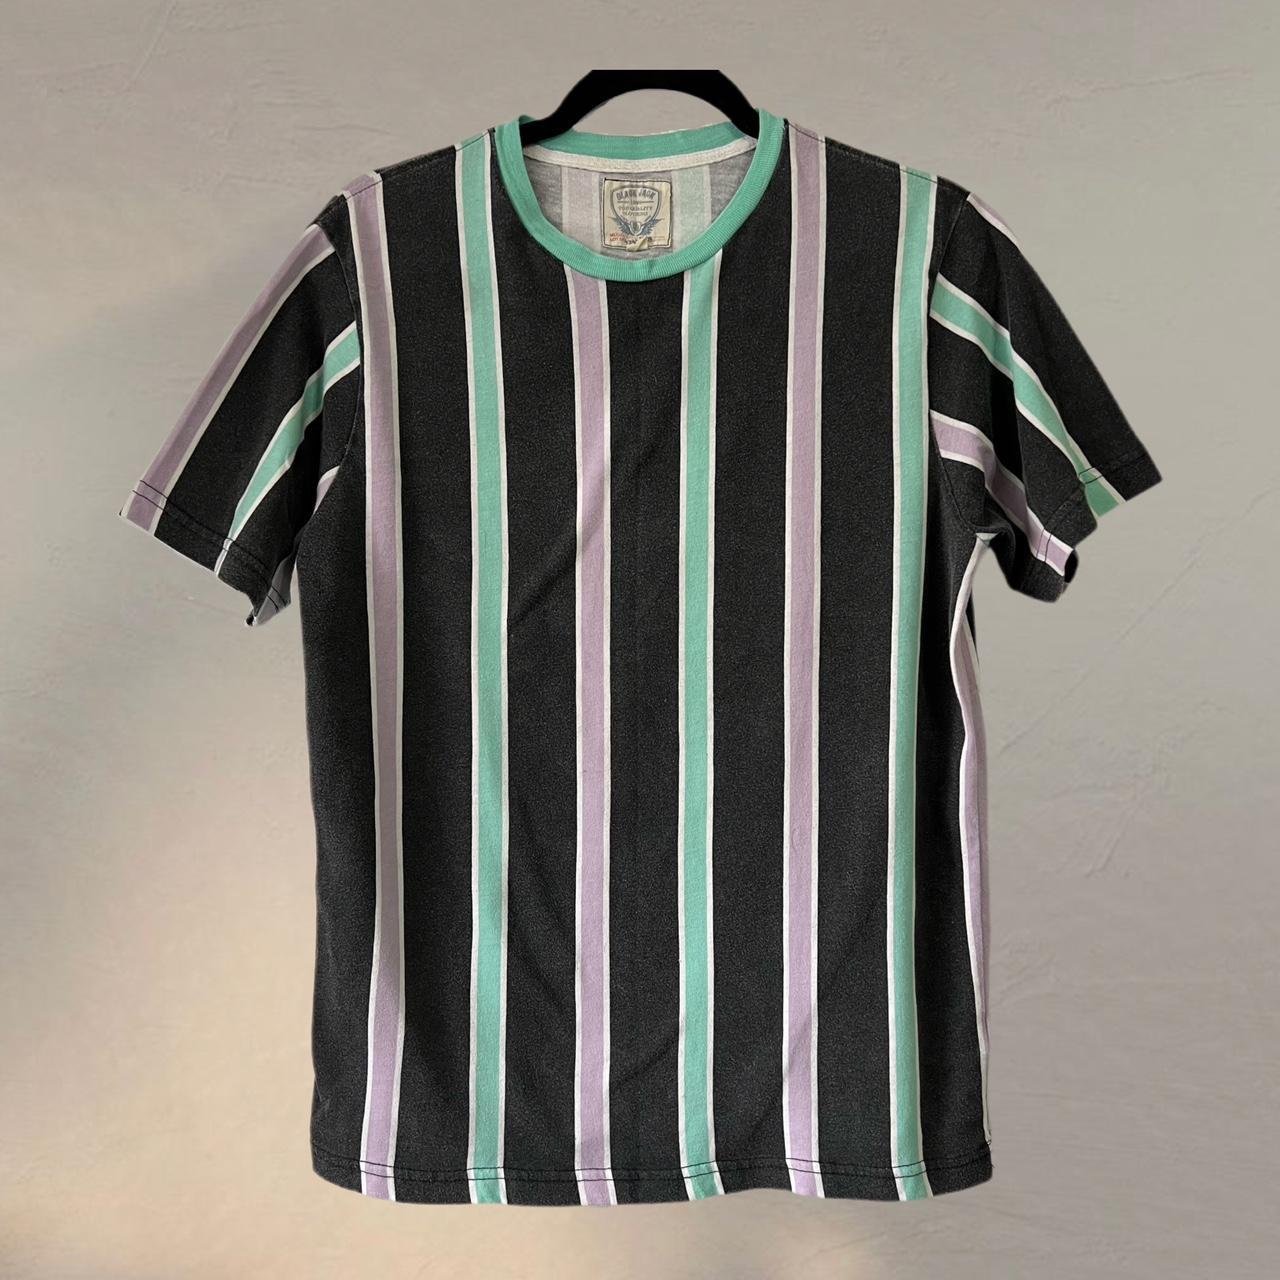 black and white vertical striped shirt